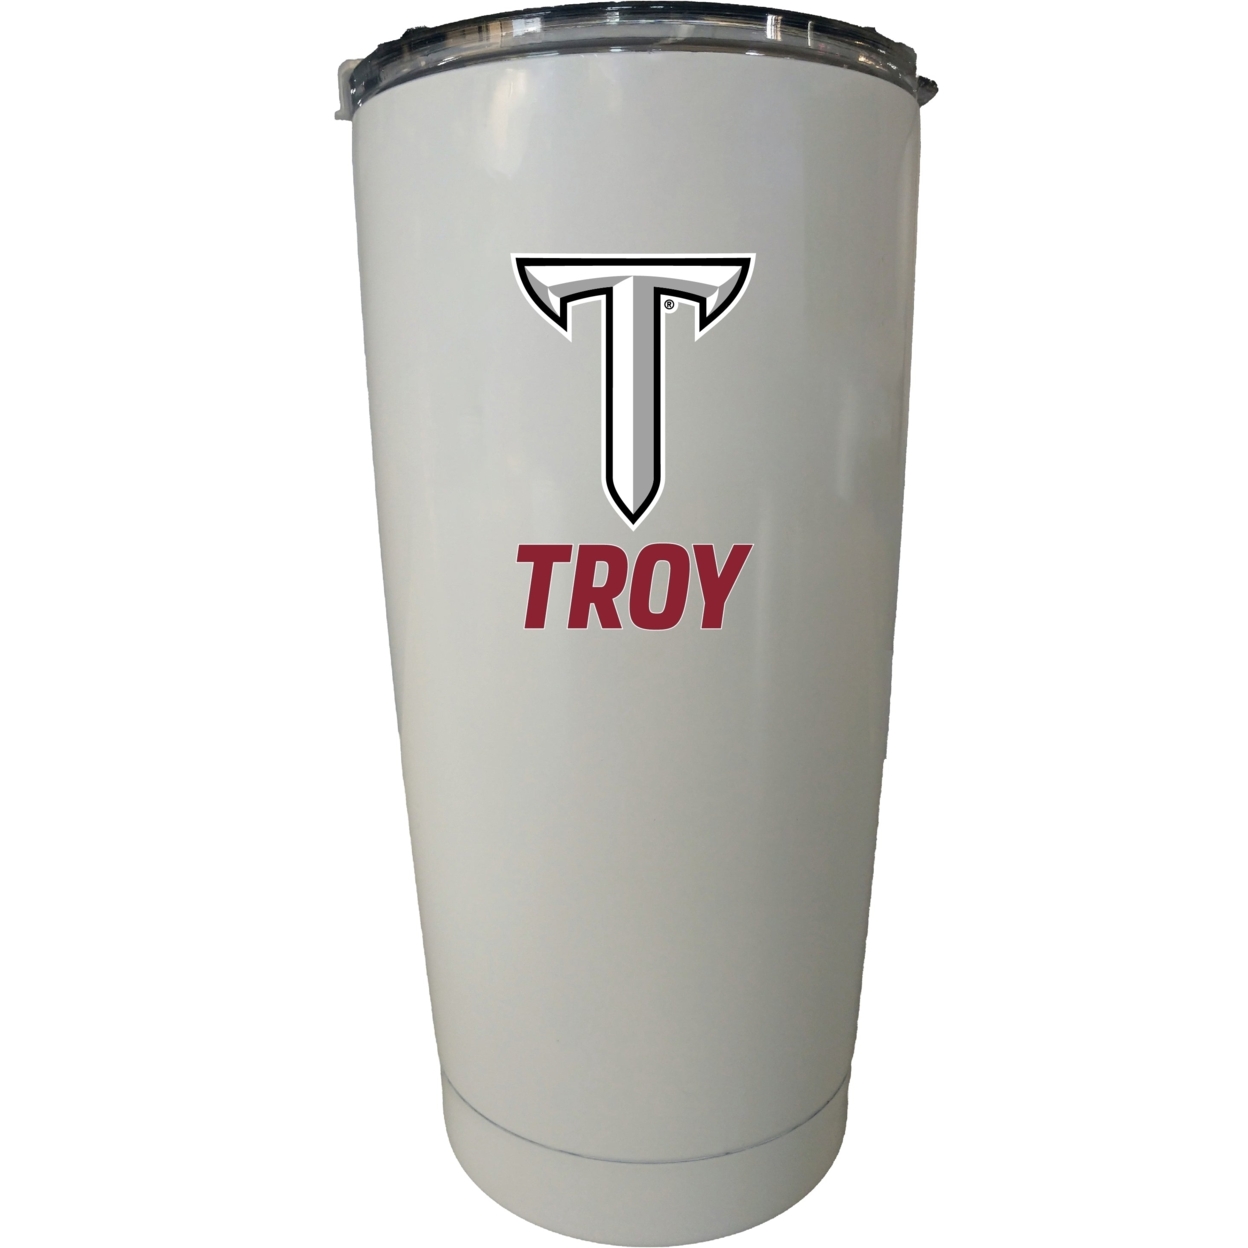 Troy University 16 Oz Choose Your Color Insulated Stainless Steel Tumbler Glossy Brushed Finish - White